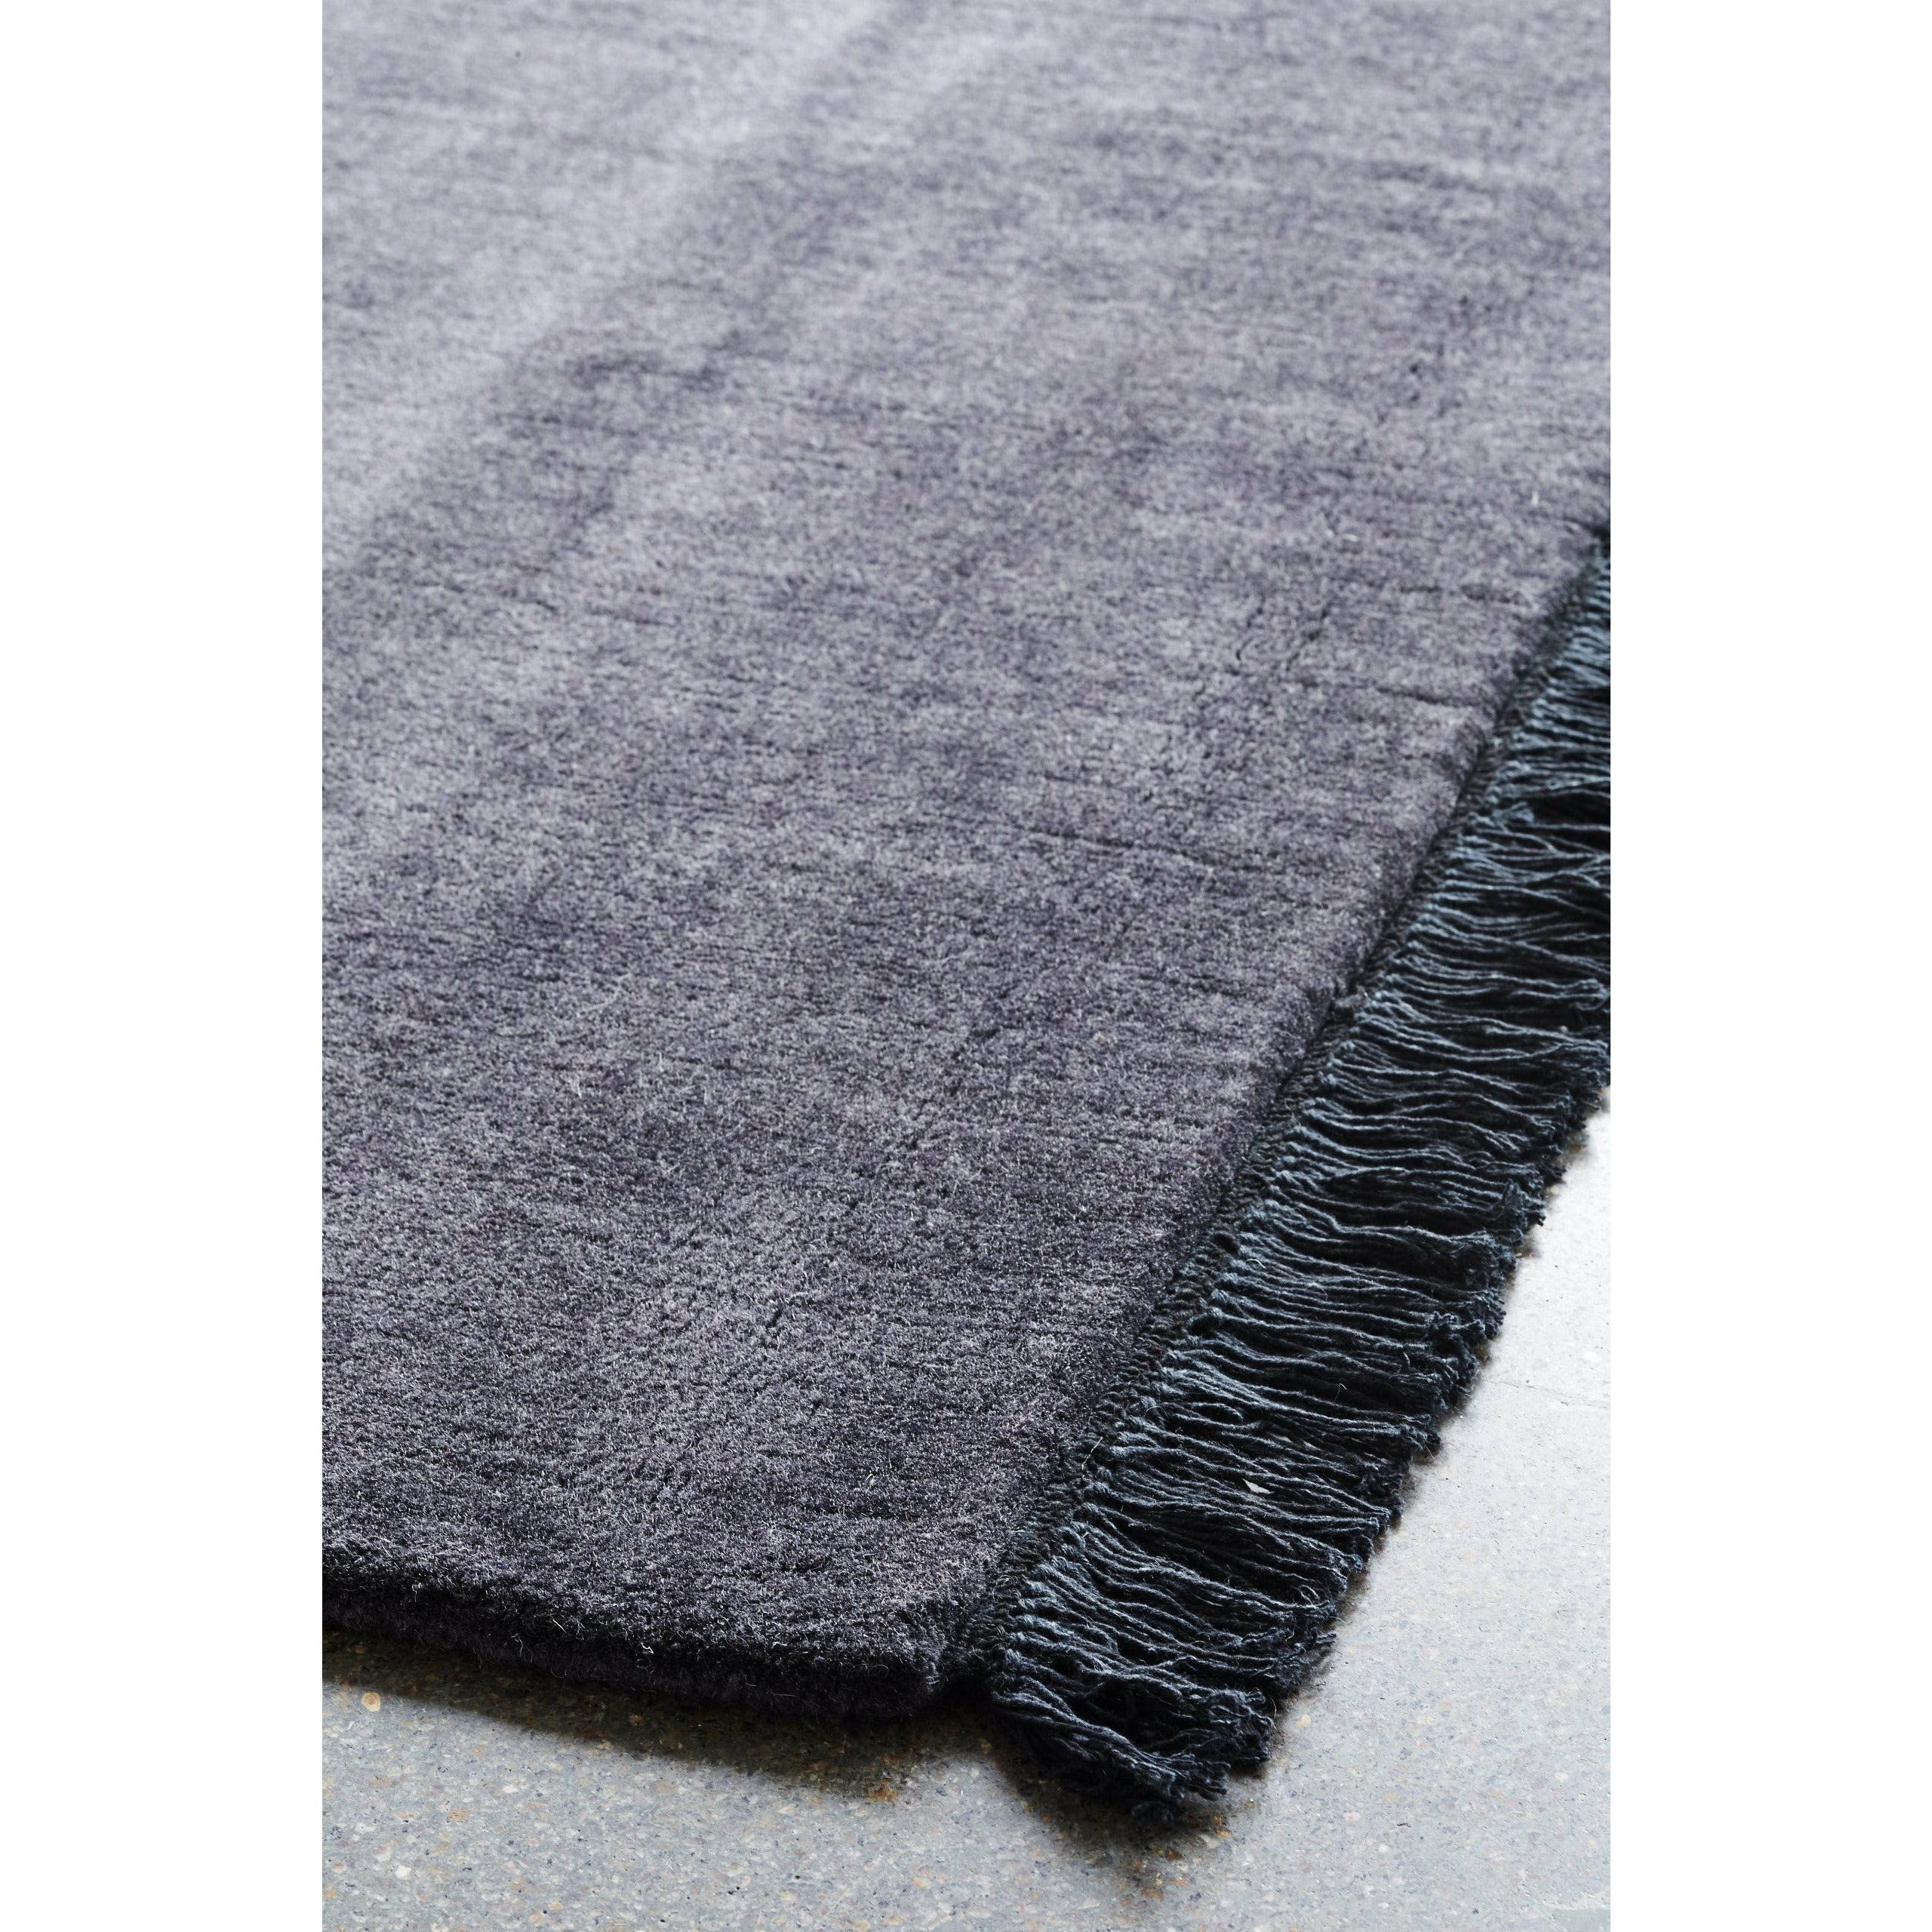 Massimo Earth Bamboo Rug Charcoal With Fringes, 170x240 Cm